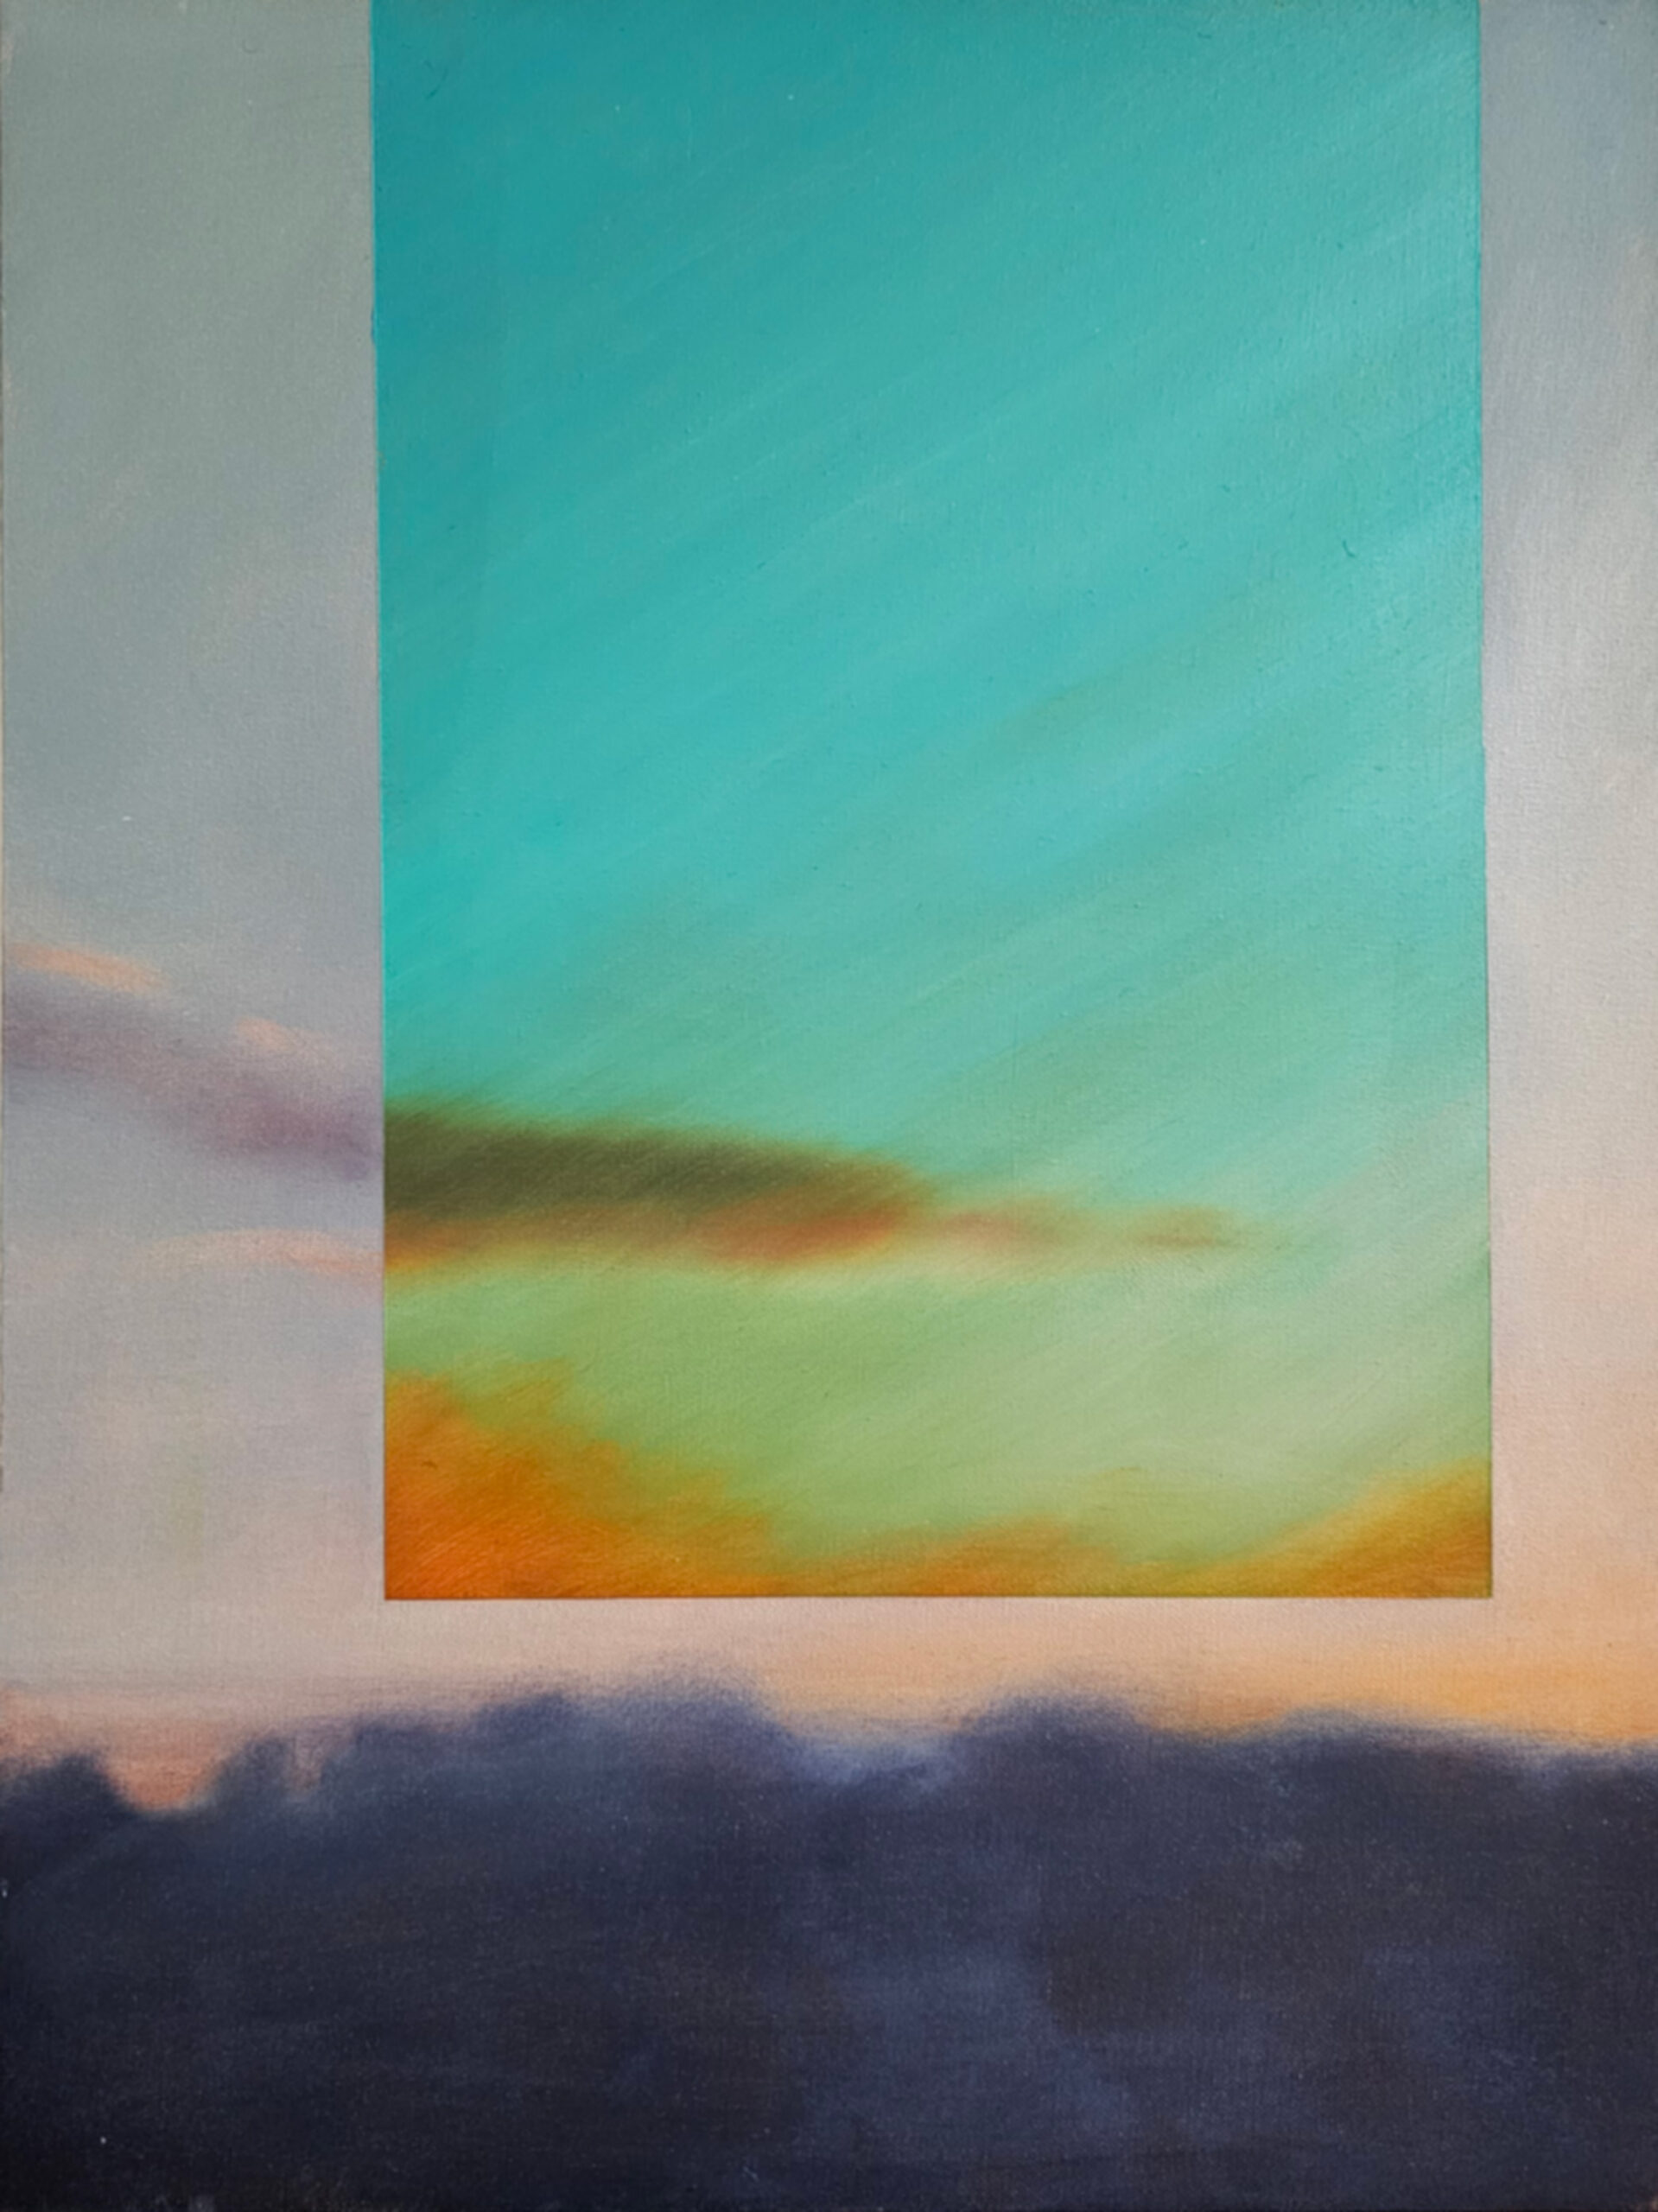 Landscape, 2023. Oil on canvas, 24 x 18 inches